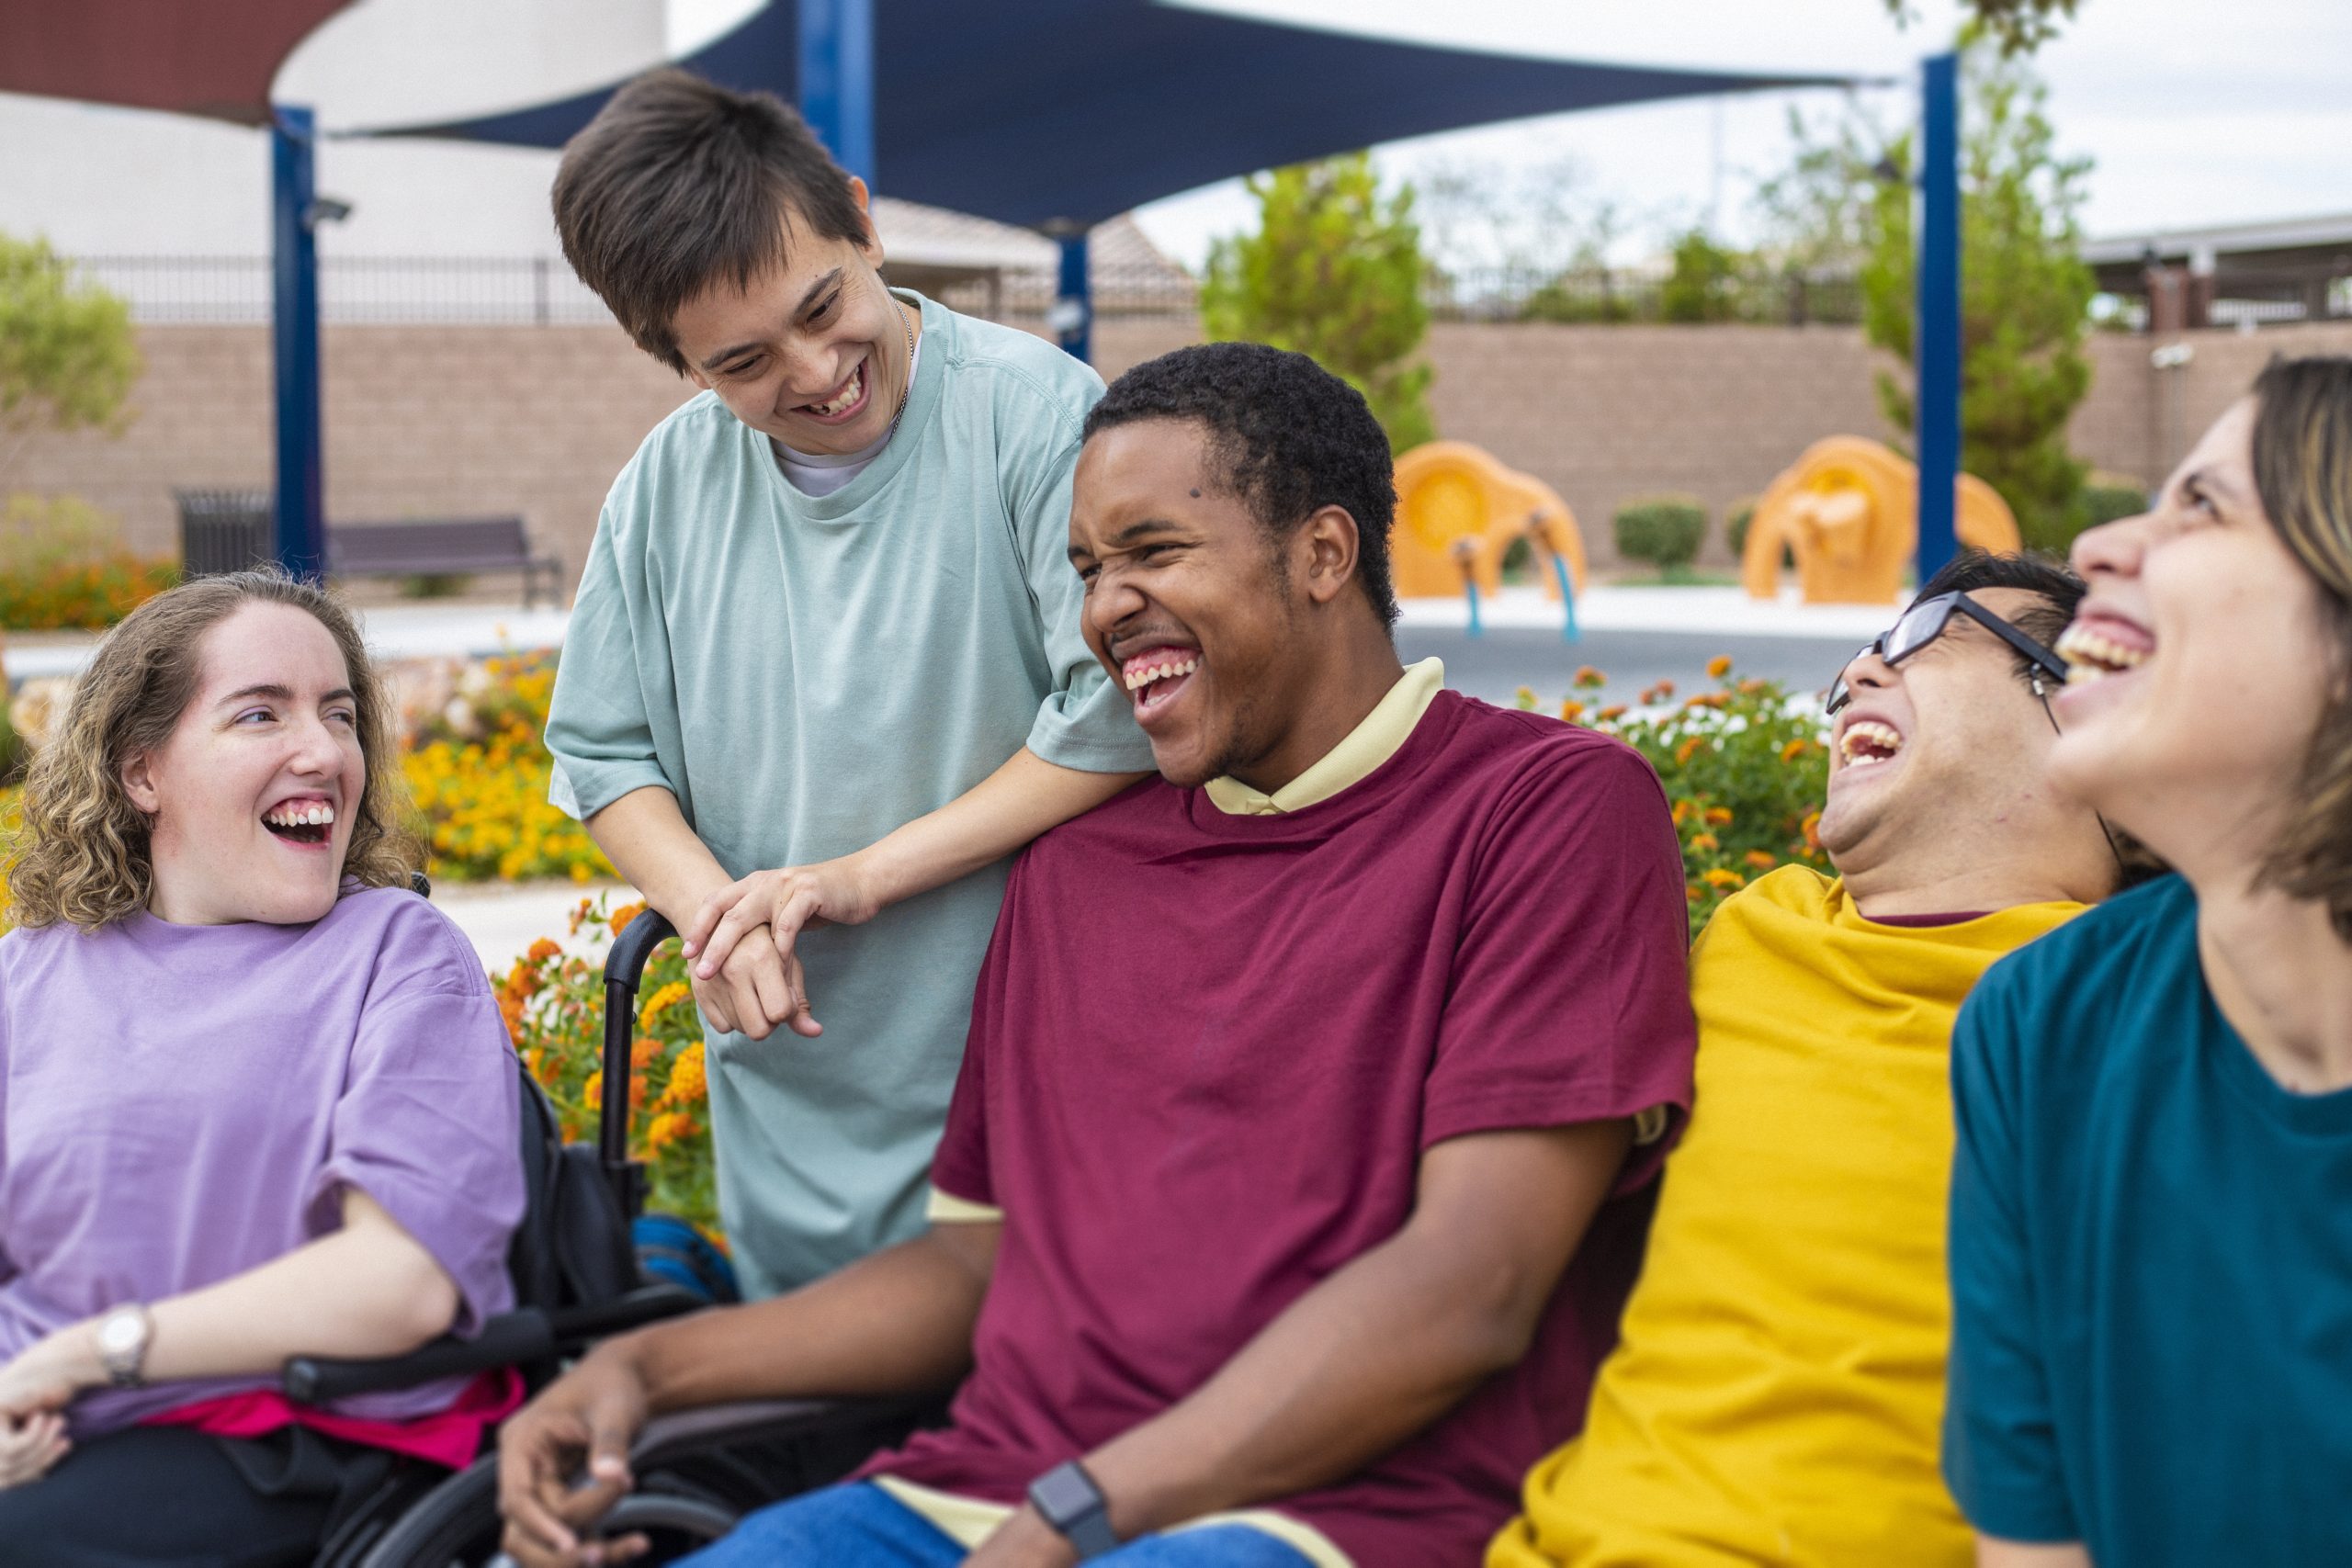 image: a group of diverse friends all with obvious disabilities laughing with each other at an outside setting